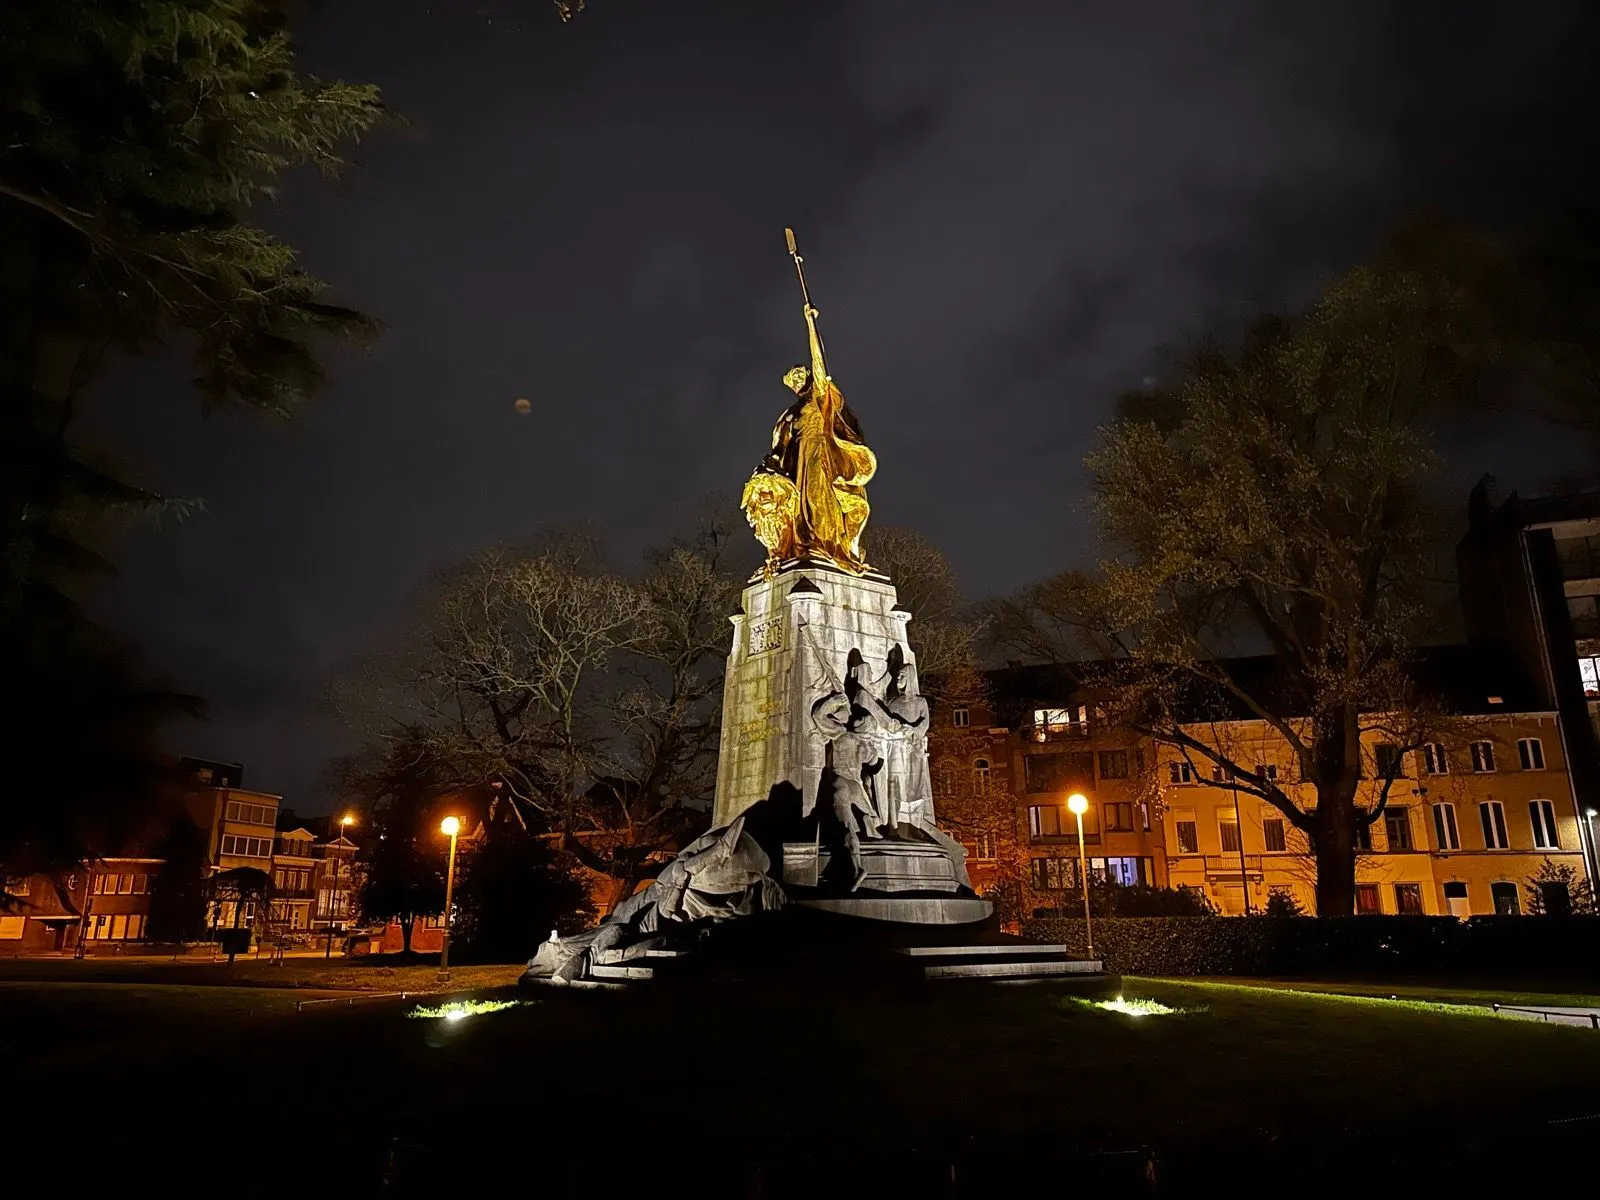 A large statue in a park, illuminated at night